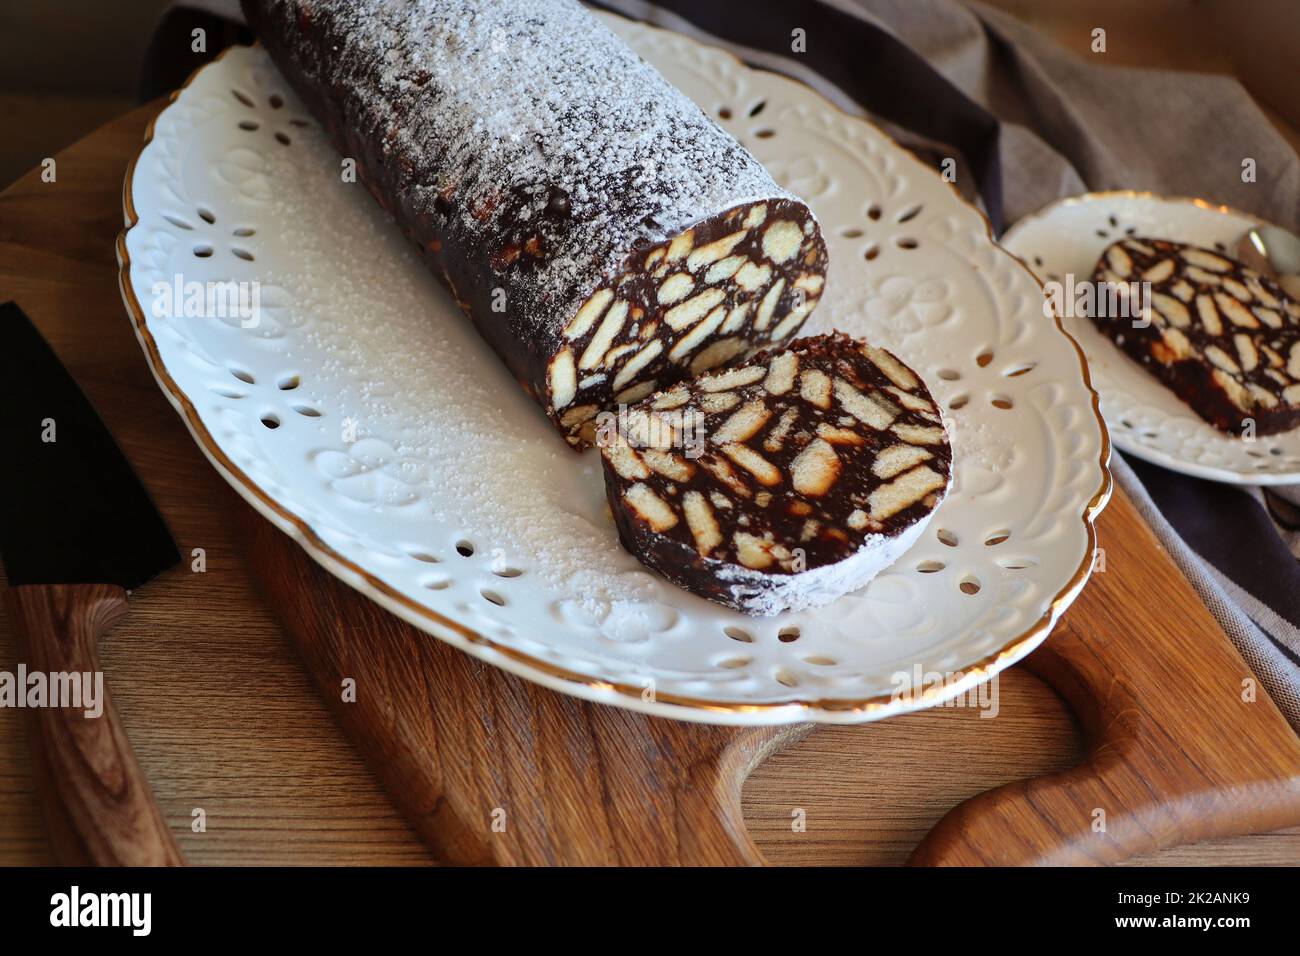 Lazy cake or mosaic cake . Homemade no bake chocolate biscuit cake on a wooden table Stock Photo